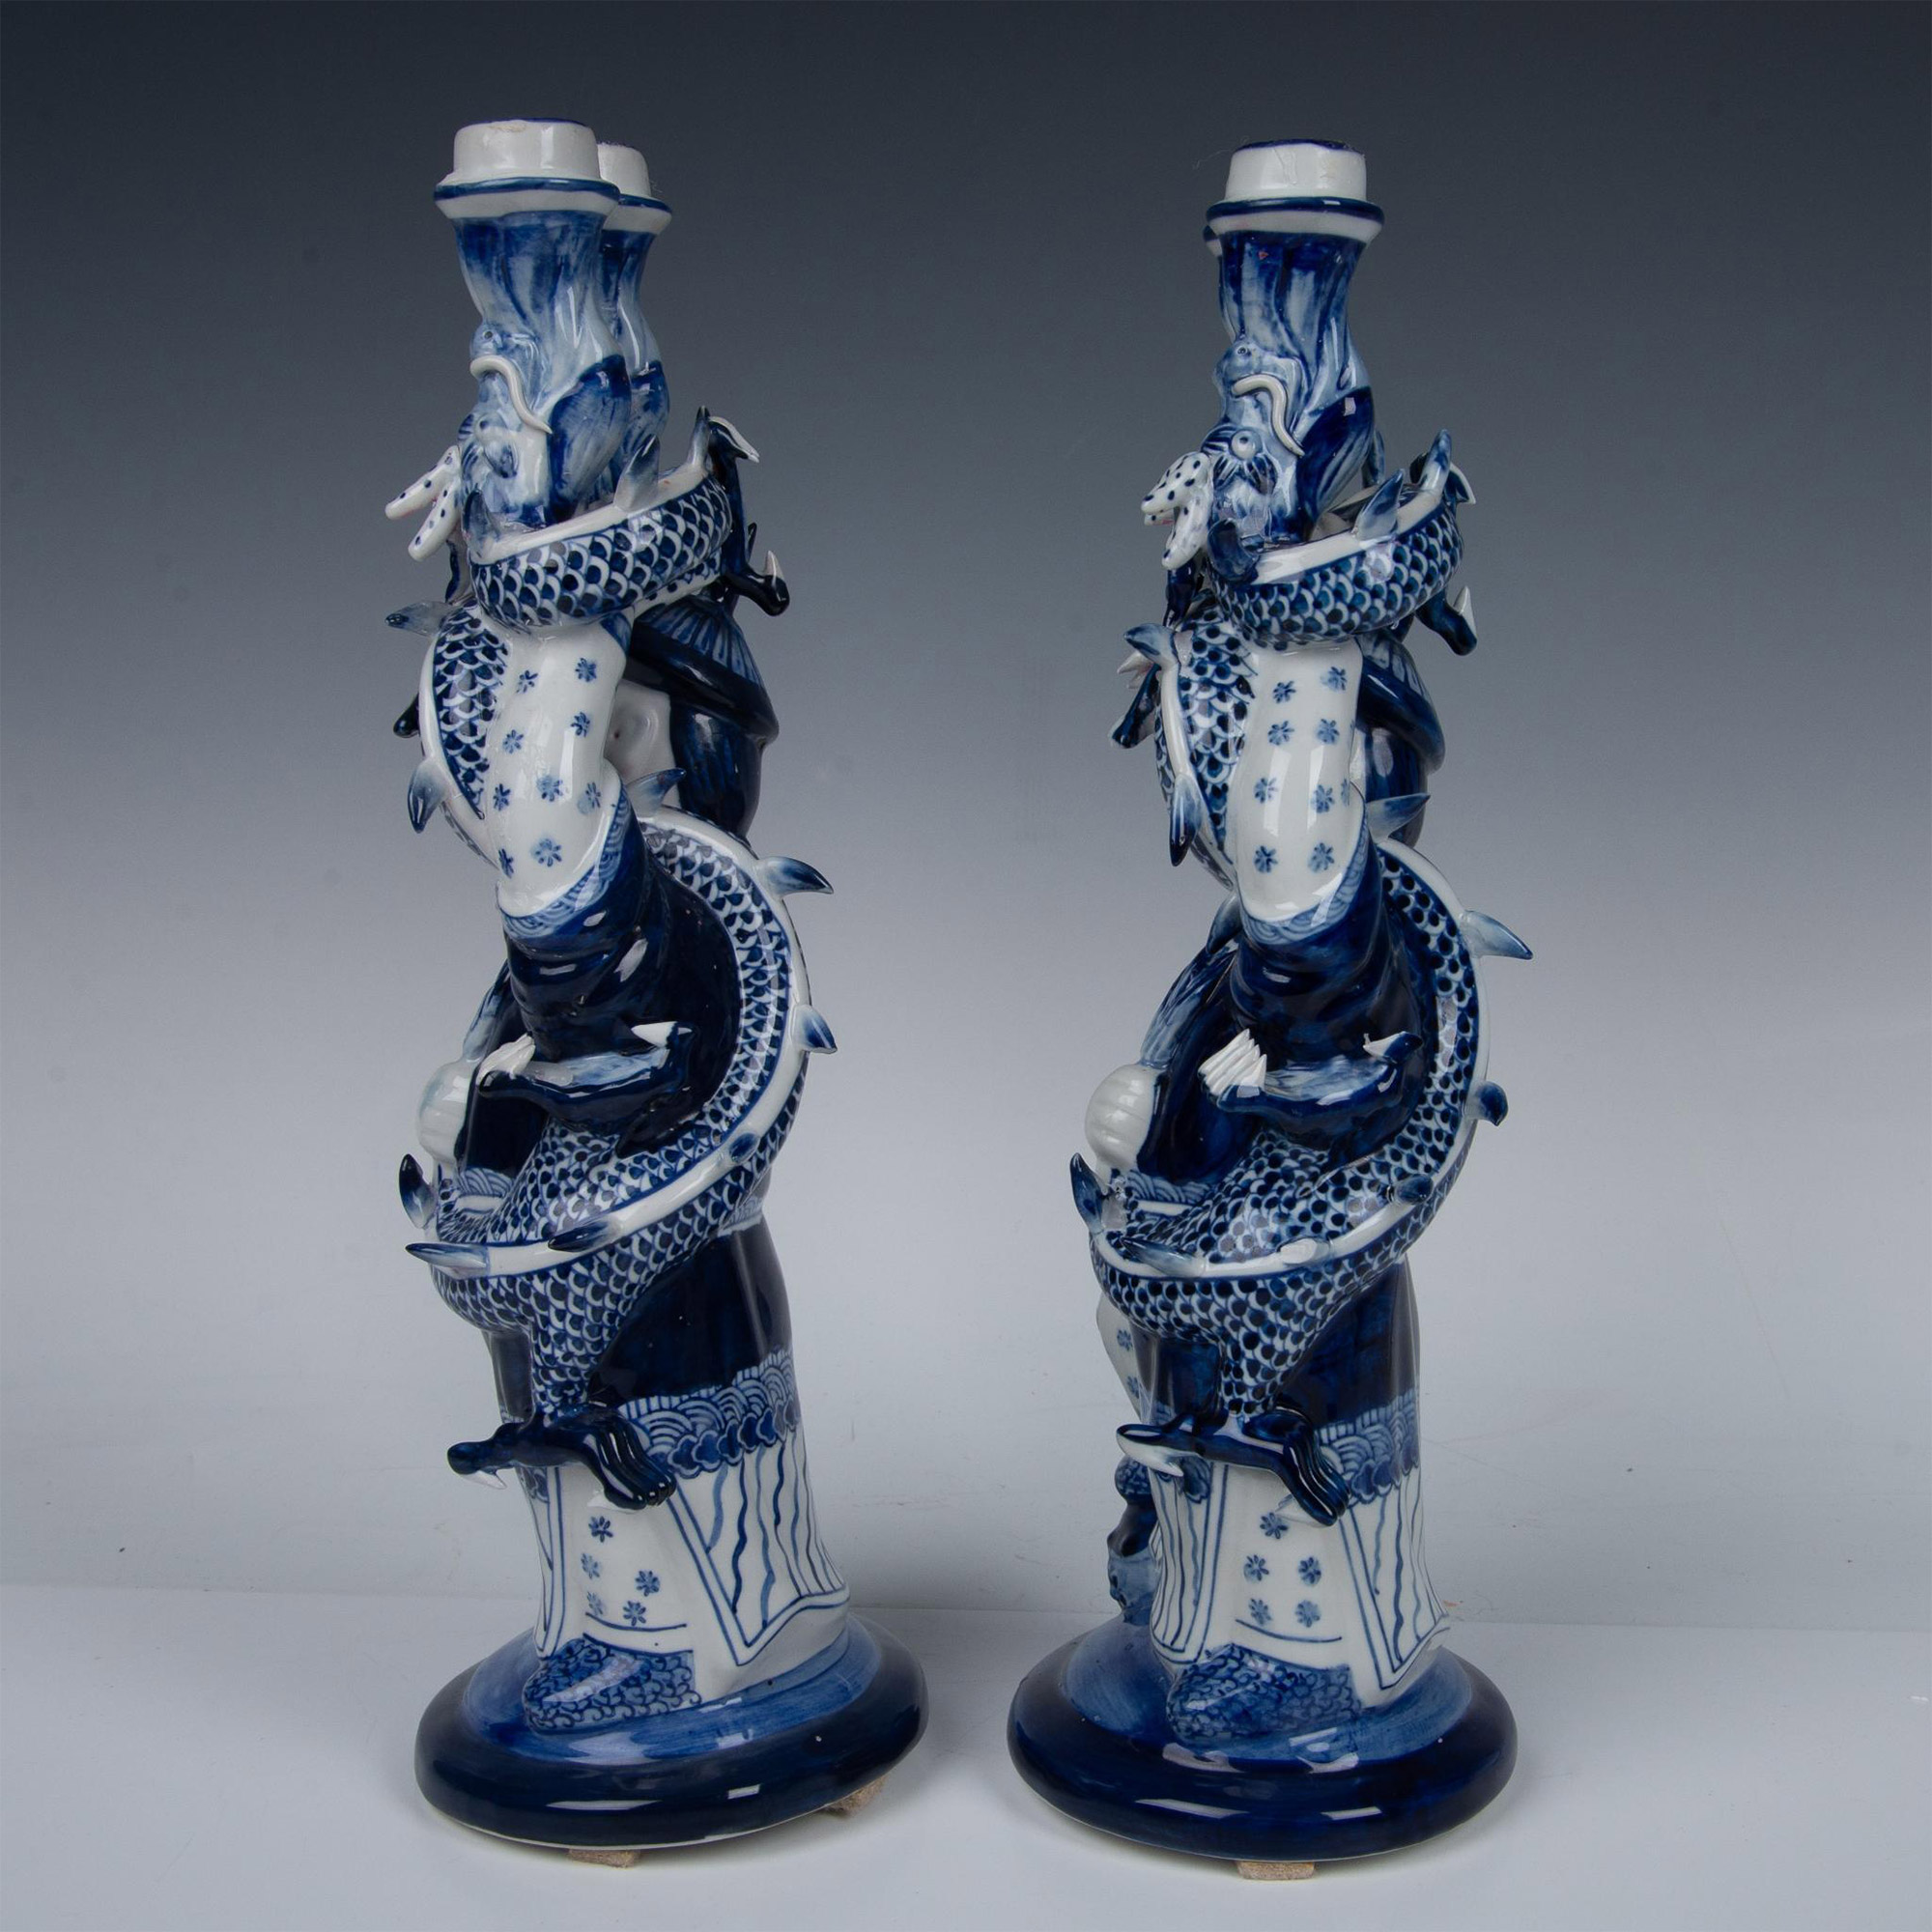 2pc Chinese Blue/White Porcelain Serpentine Candleholders - Image 4 of 7